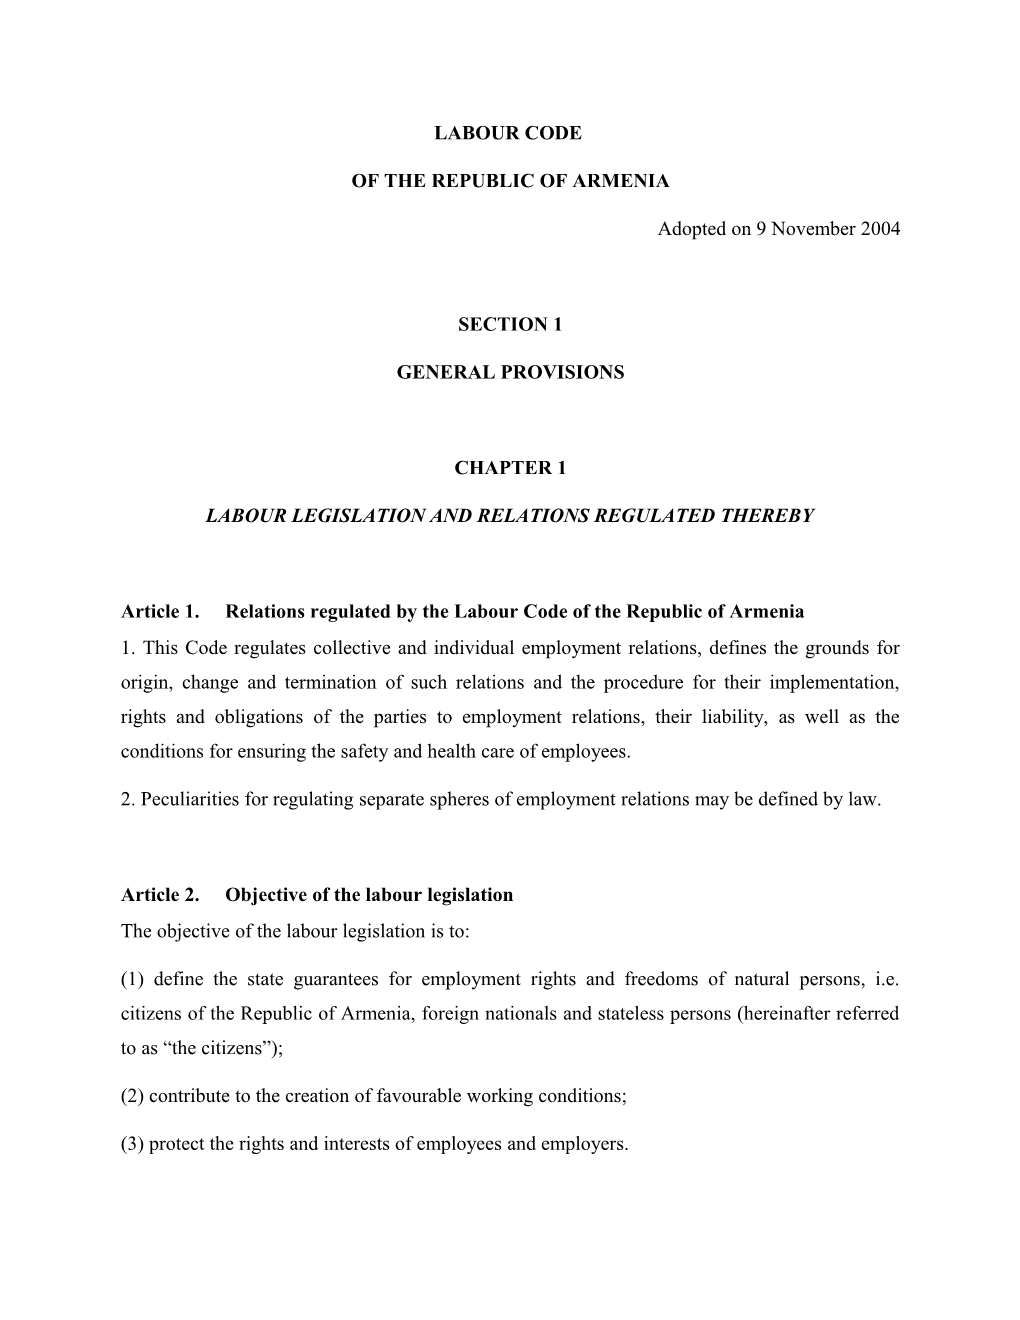 Labour Legislation and Relations Regulated Thereby